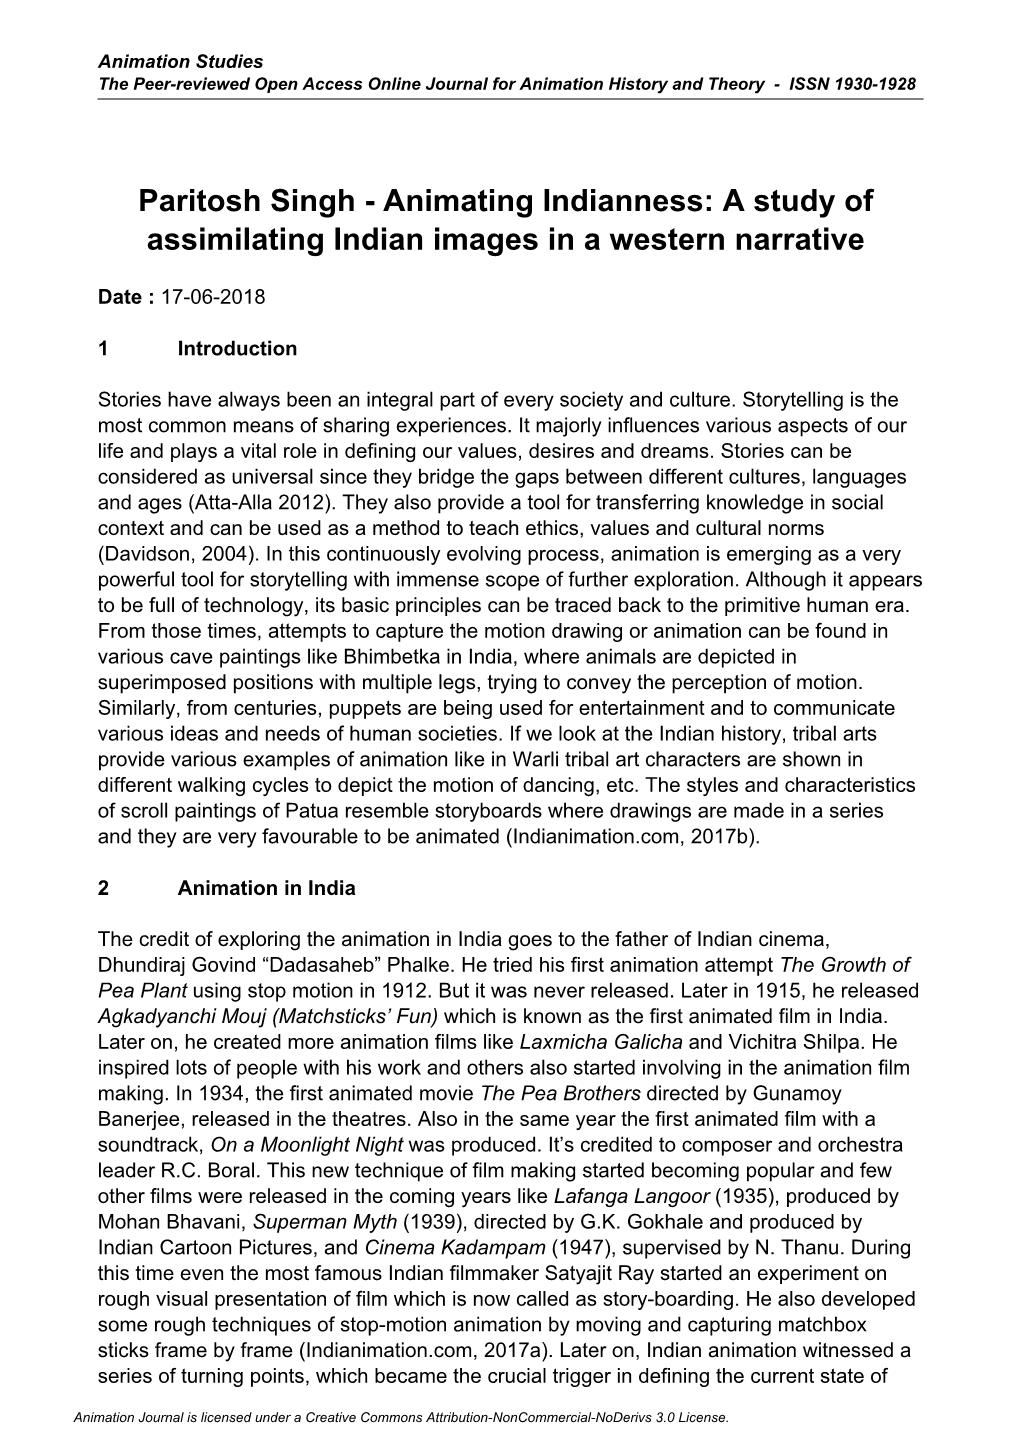 Paritosh Singh - Animating Indianness: a Study of Assimilating Indian Images in a Western Narrative